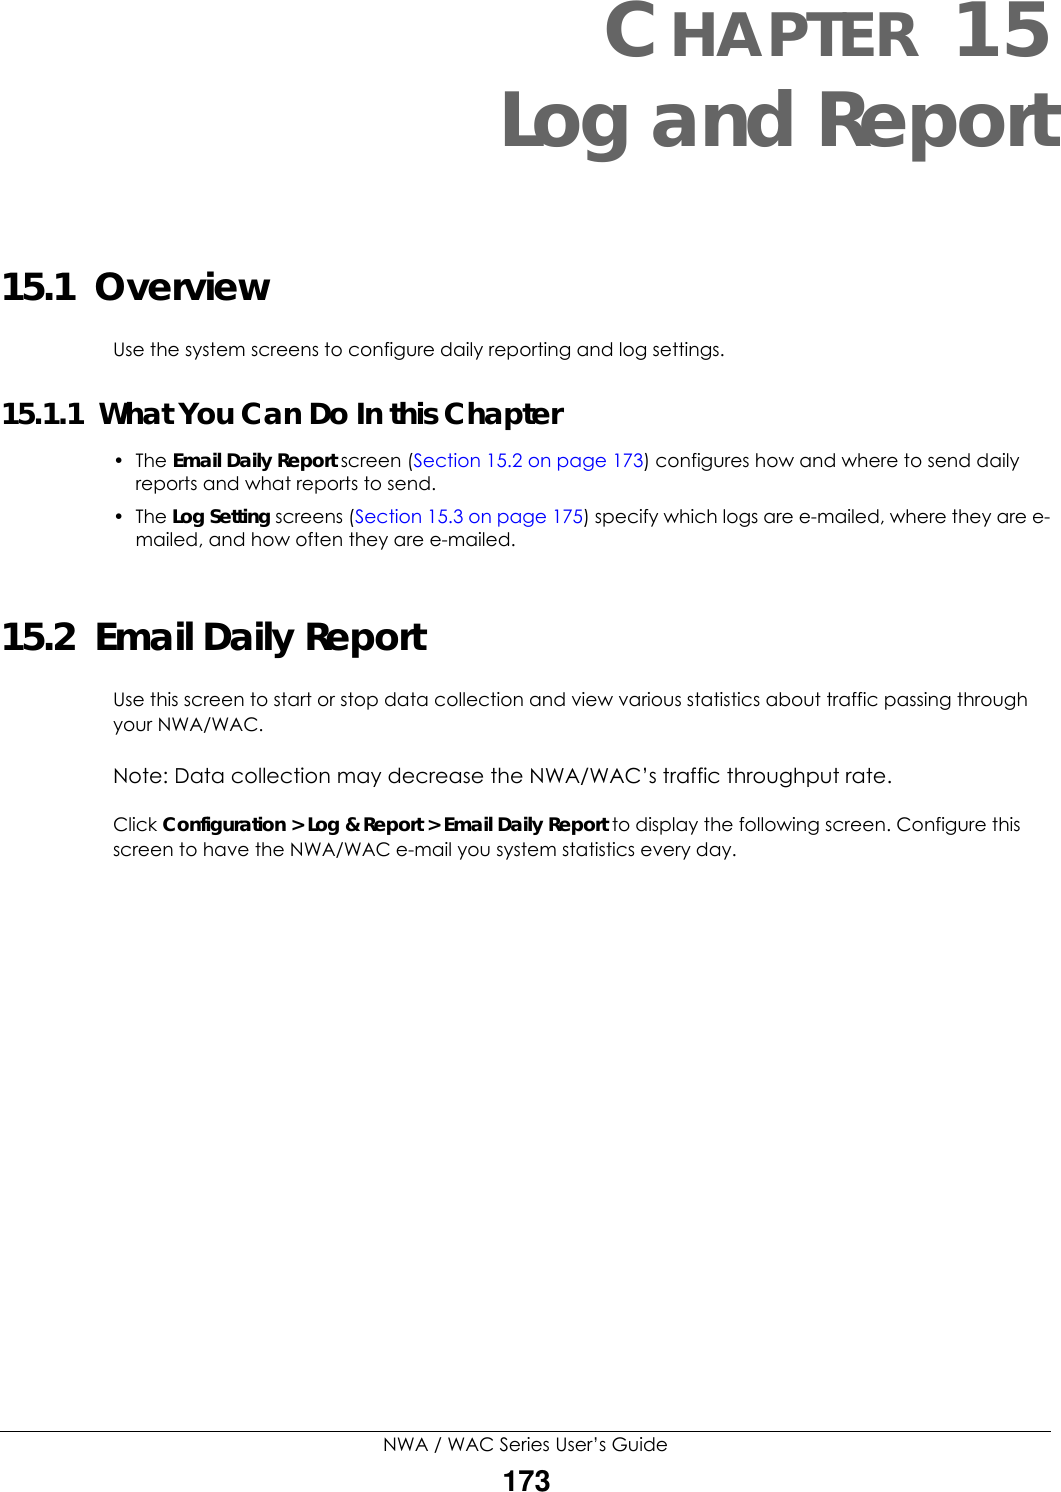 NWA / WAC Series User’s Guide173CHAPTER 15Log and Report15.1  OverviewUse the system screens to configure daily reporting and log settings. 15.1.1  What You Can Do In this Chapter• The Email Daily Report screen (Section 15.2 on page 173) configures how and where to send daily reports and what reports to send.• The Log Setting screens (Section 15.3 on page 175) specify which logs are e-mailed, where they are e-mailed, and how often they are e-mailed.15.2  Email Daily ReportUse this screen to start or stop data collection and view various statistics about traffic passing through your NWA/WAC. Note: Data collection may decrease the NWA/WAC’s traffic throughput rate.Click Configuration &gt; Log &amp; Report &gt; Email Daily Report to display the following screen. Configure this screen to have the NWA/WAC e-mail you system statistics every day. 